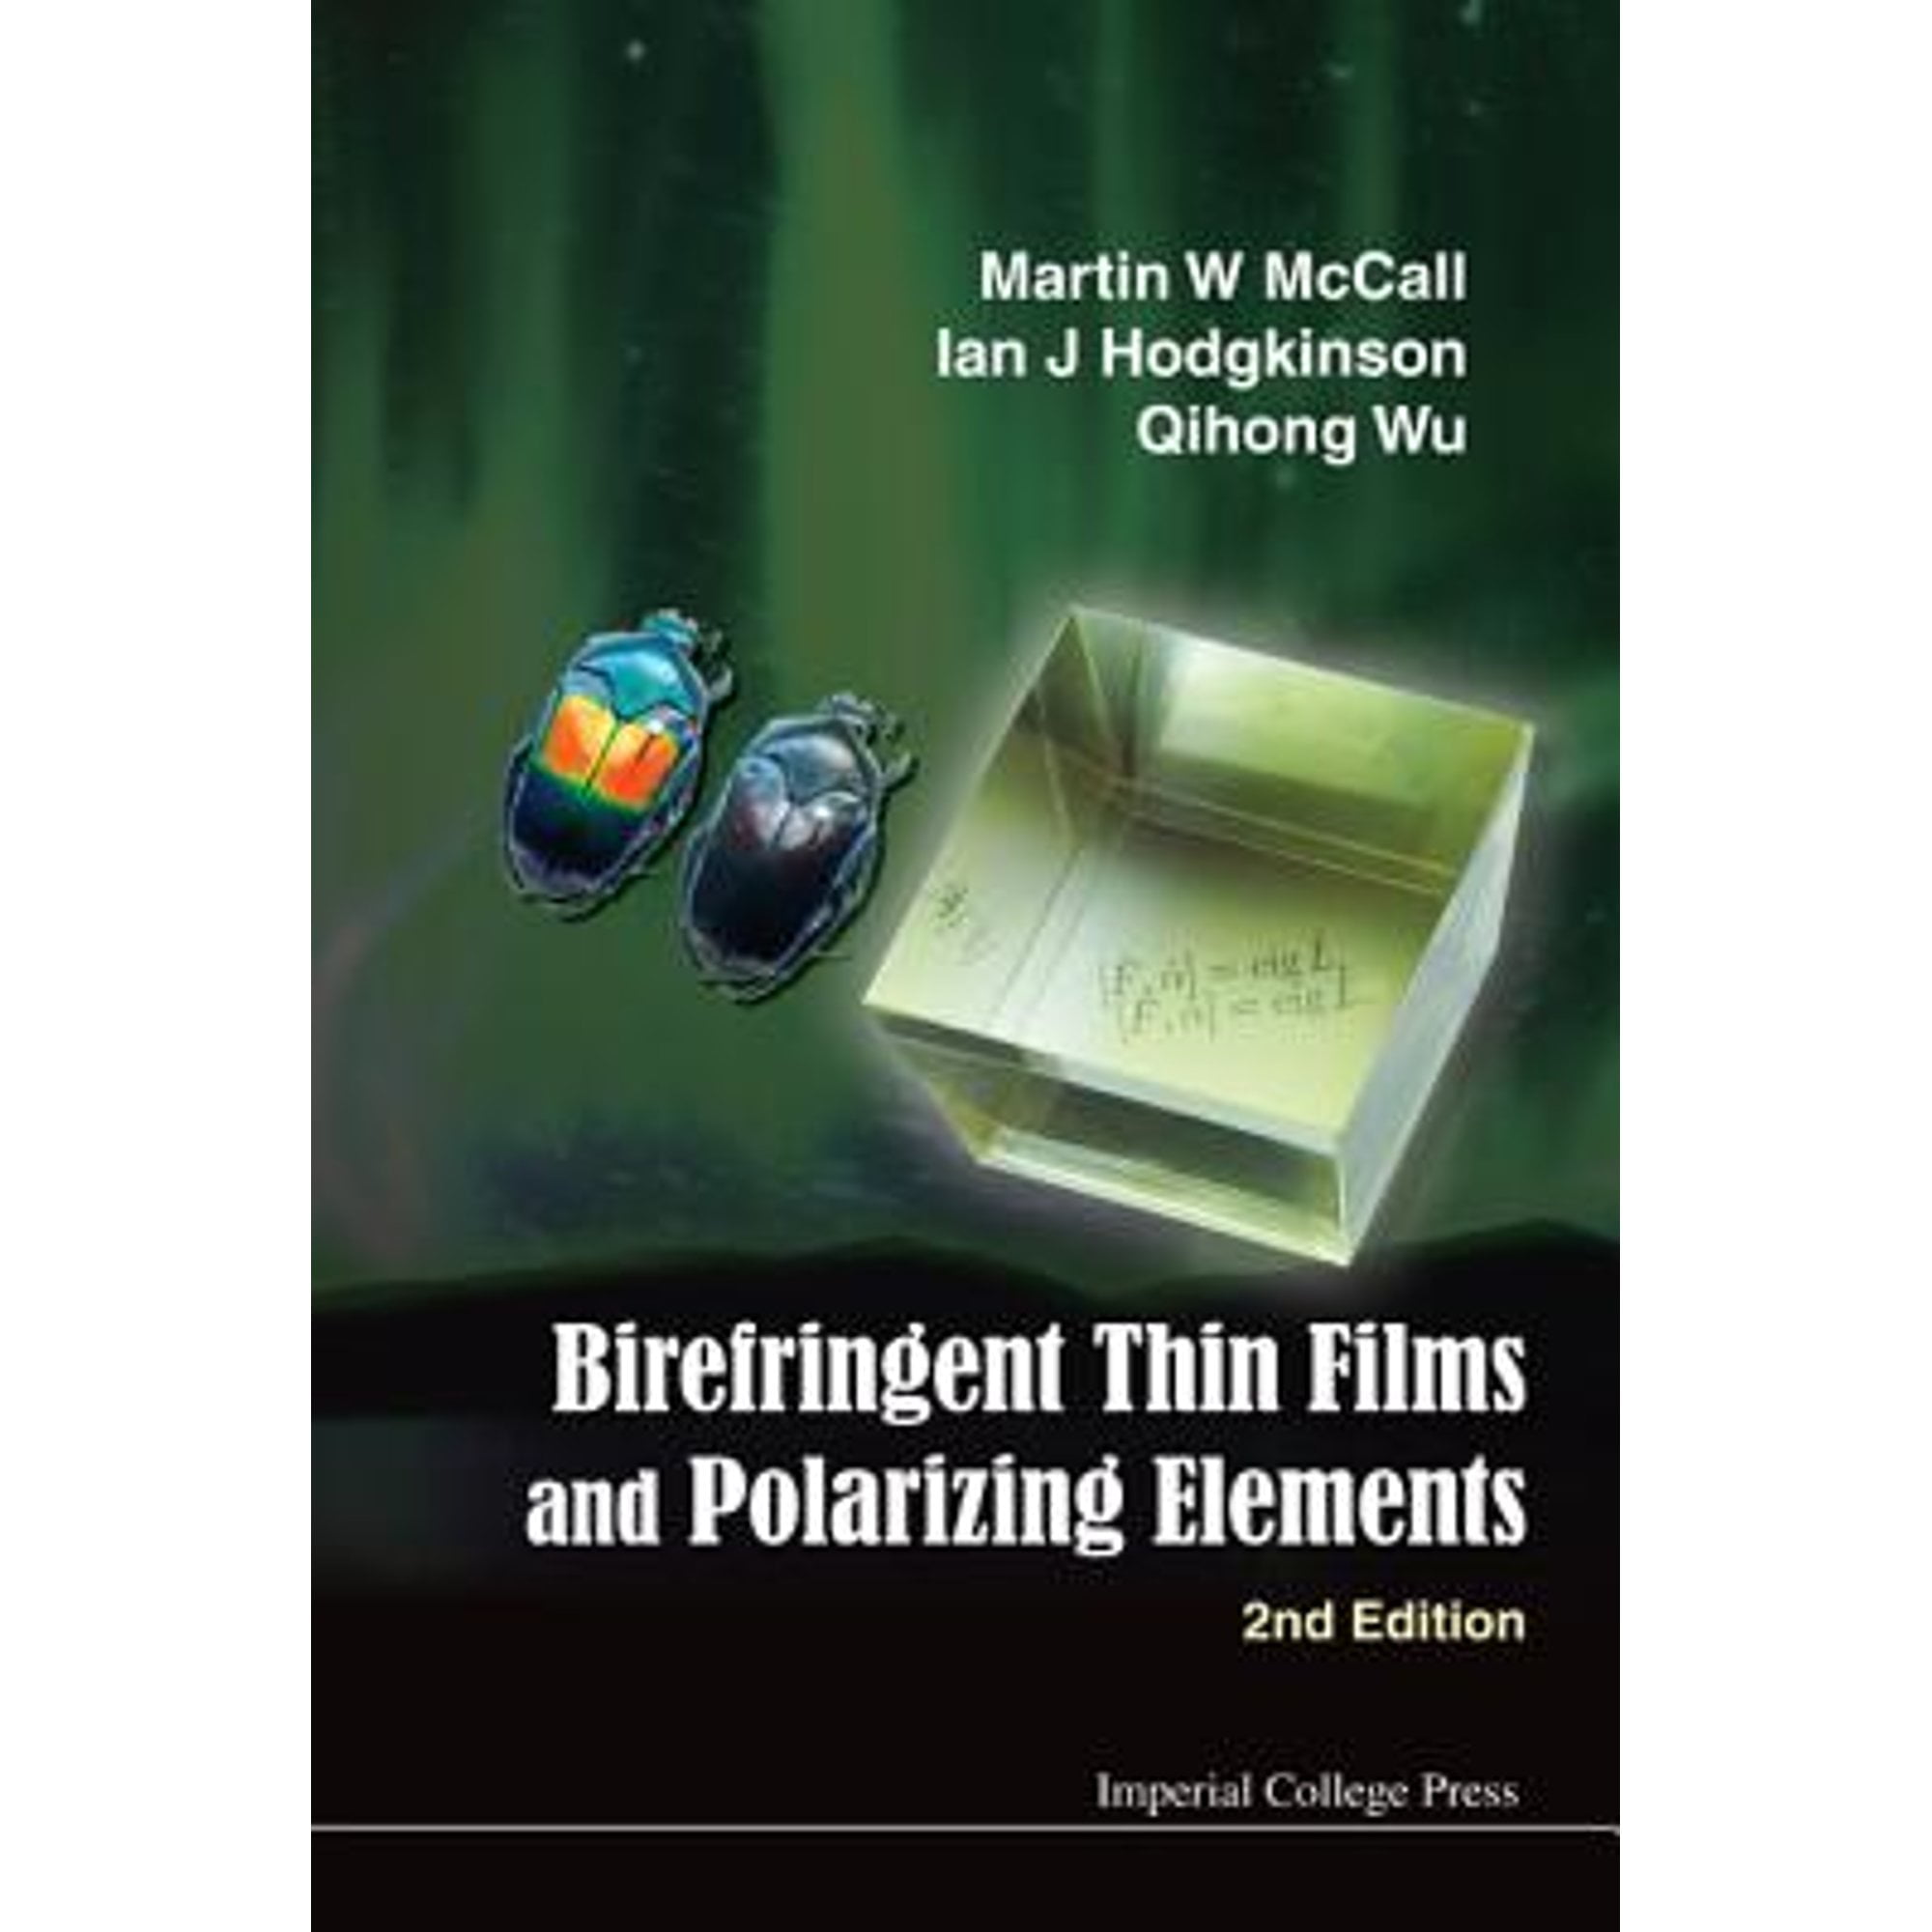 Pre-Owned Birefringent Thin Films and Polarizing Elements (2nd Edition) (Hardcover) by Martin W McCall, Ian J Hodgkinson, Qihong Wu